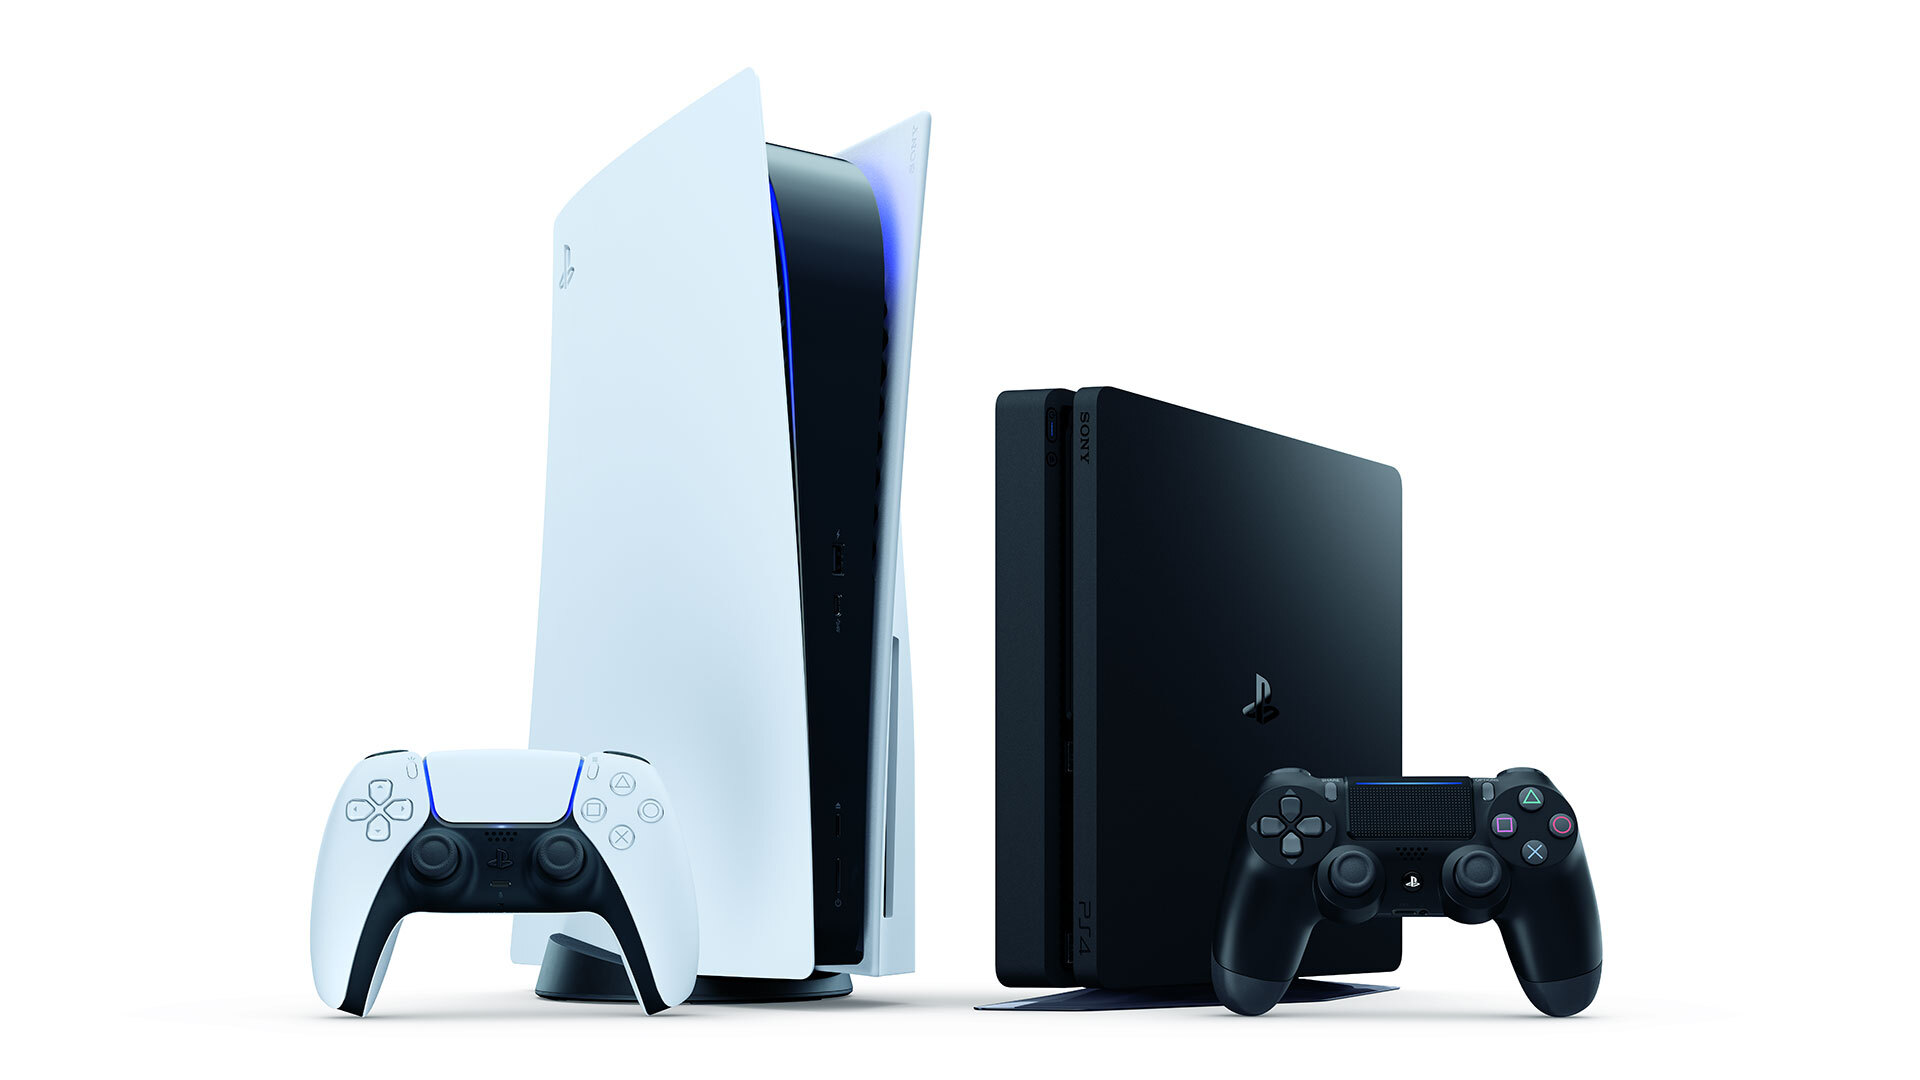 PlayStation on X: System software features like Open and Closed